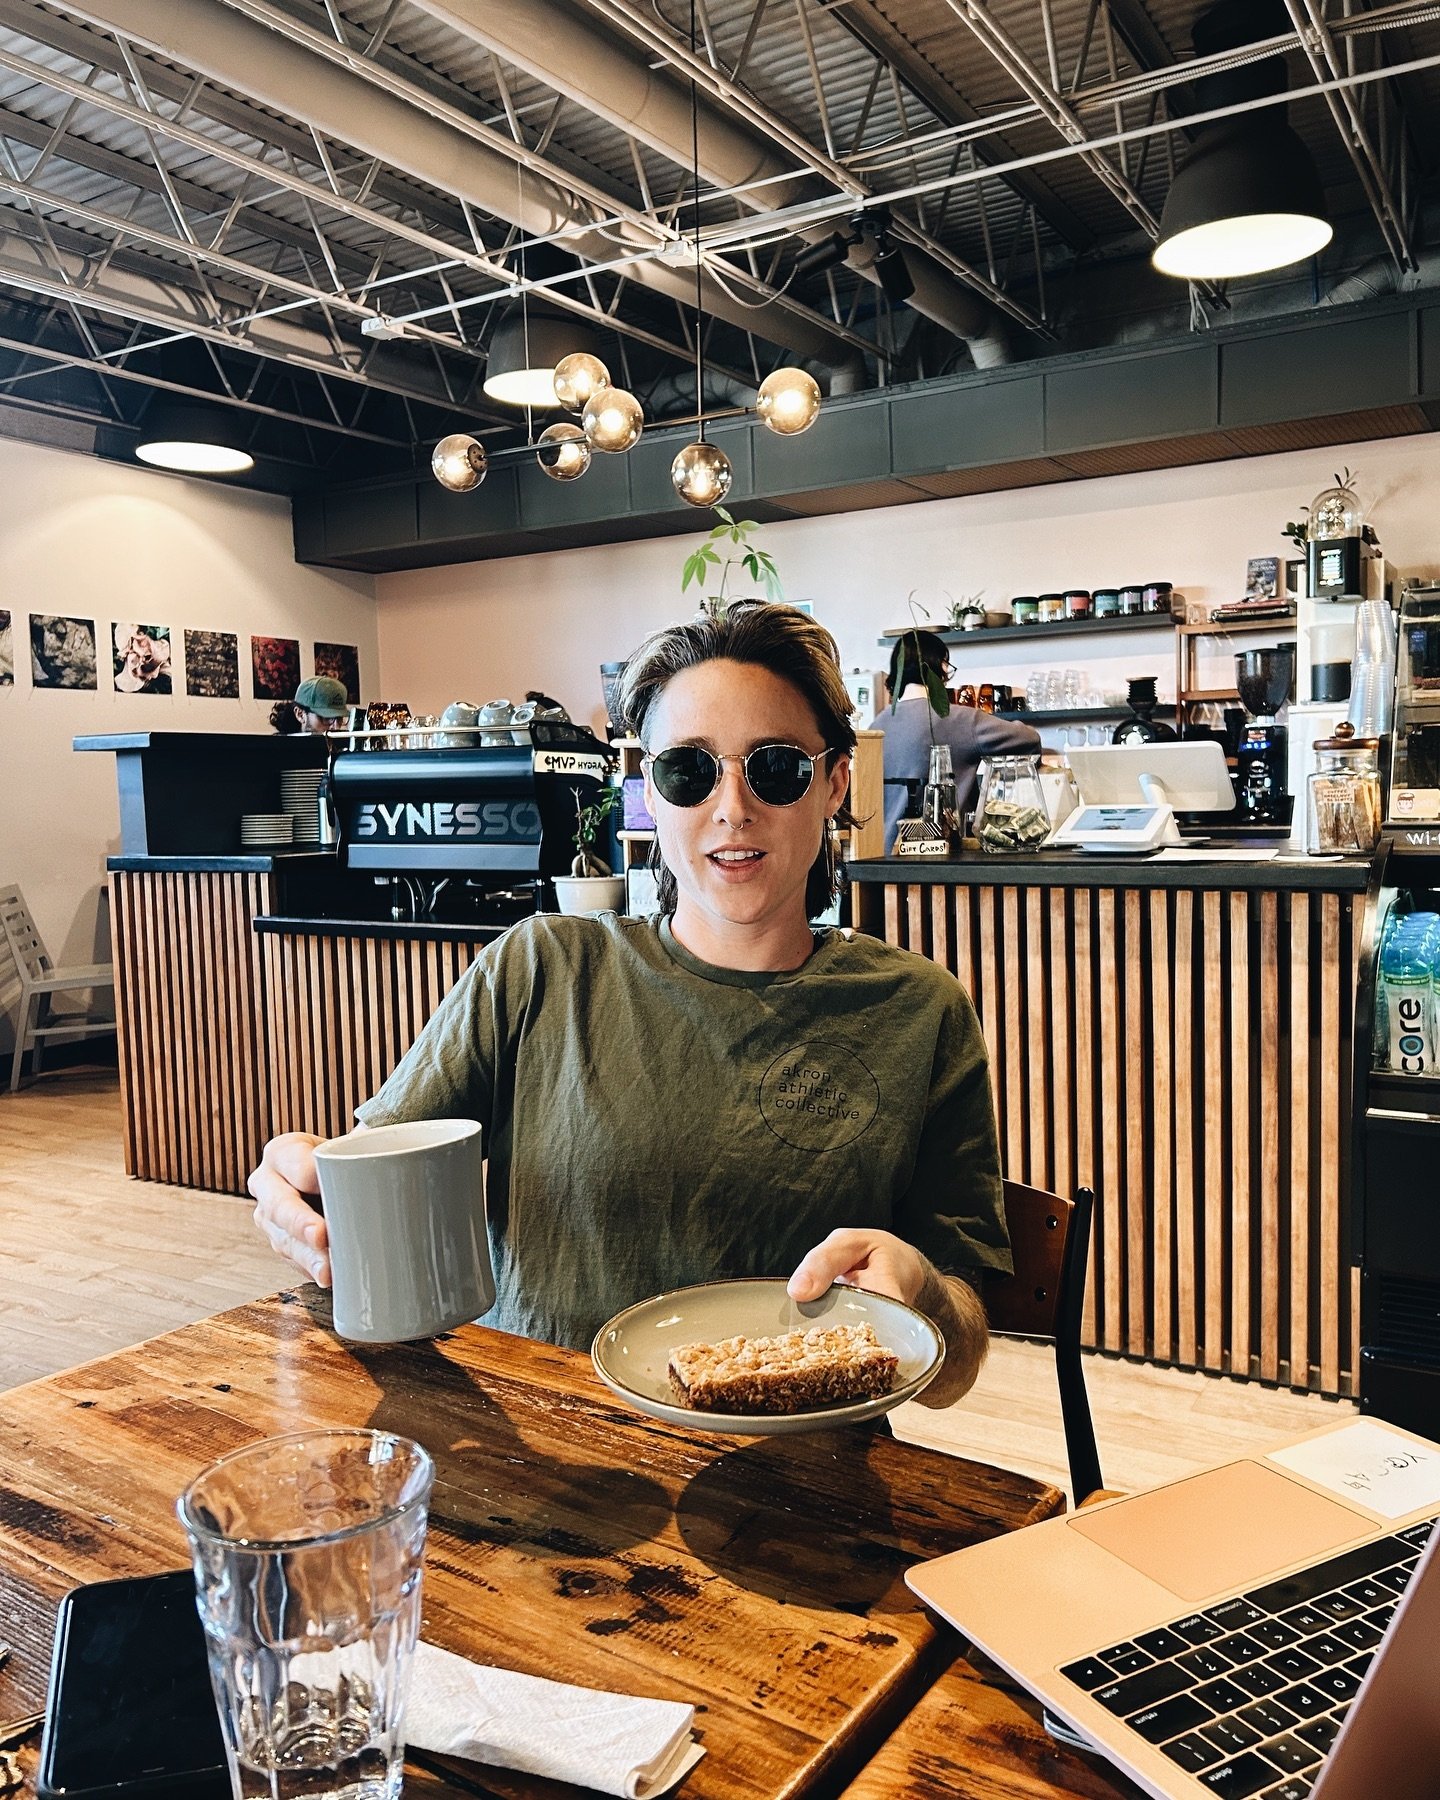 The gym tee is wrinkled but the jam bar is perfect @jamtoothbakingco 😉 The last 4 admin days have looked like this, shout out @portalwestcoffee! Members check your email for the newsletter 🧑🏻&zwj;💻 Last chance to sign up for the Collective Sweat 